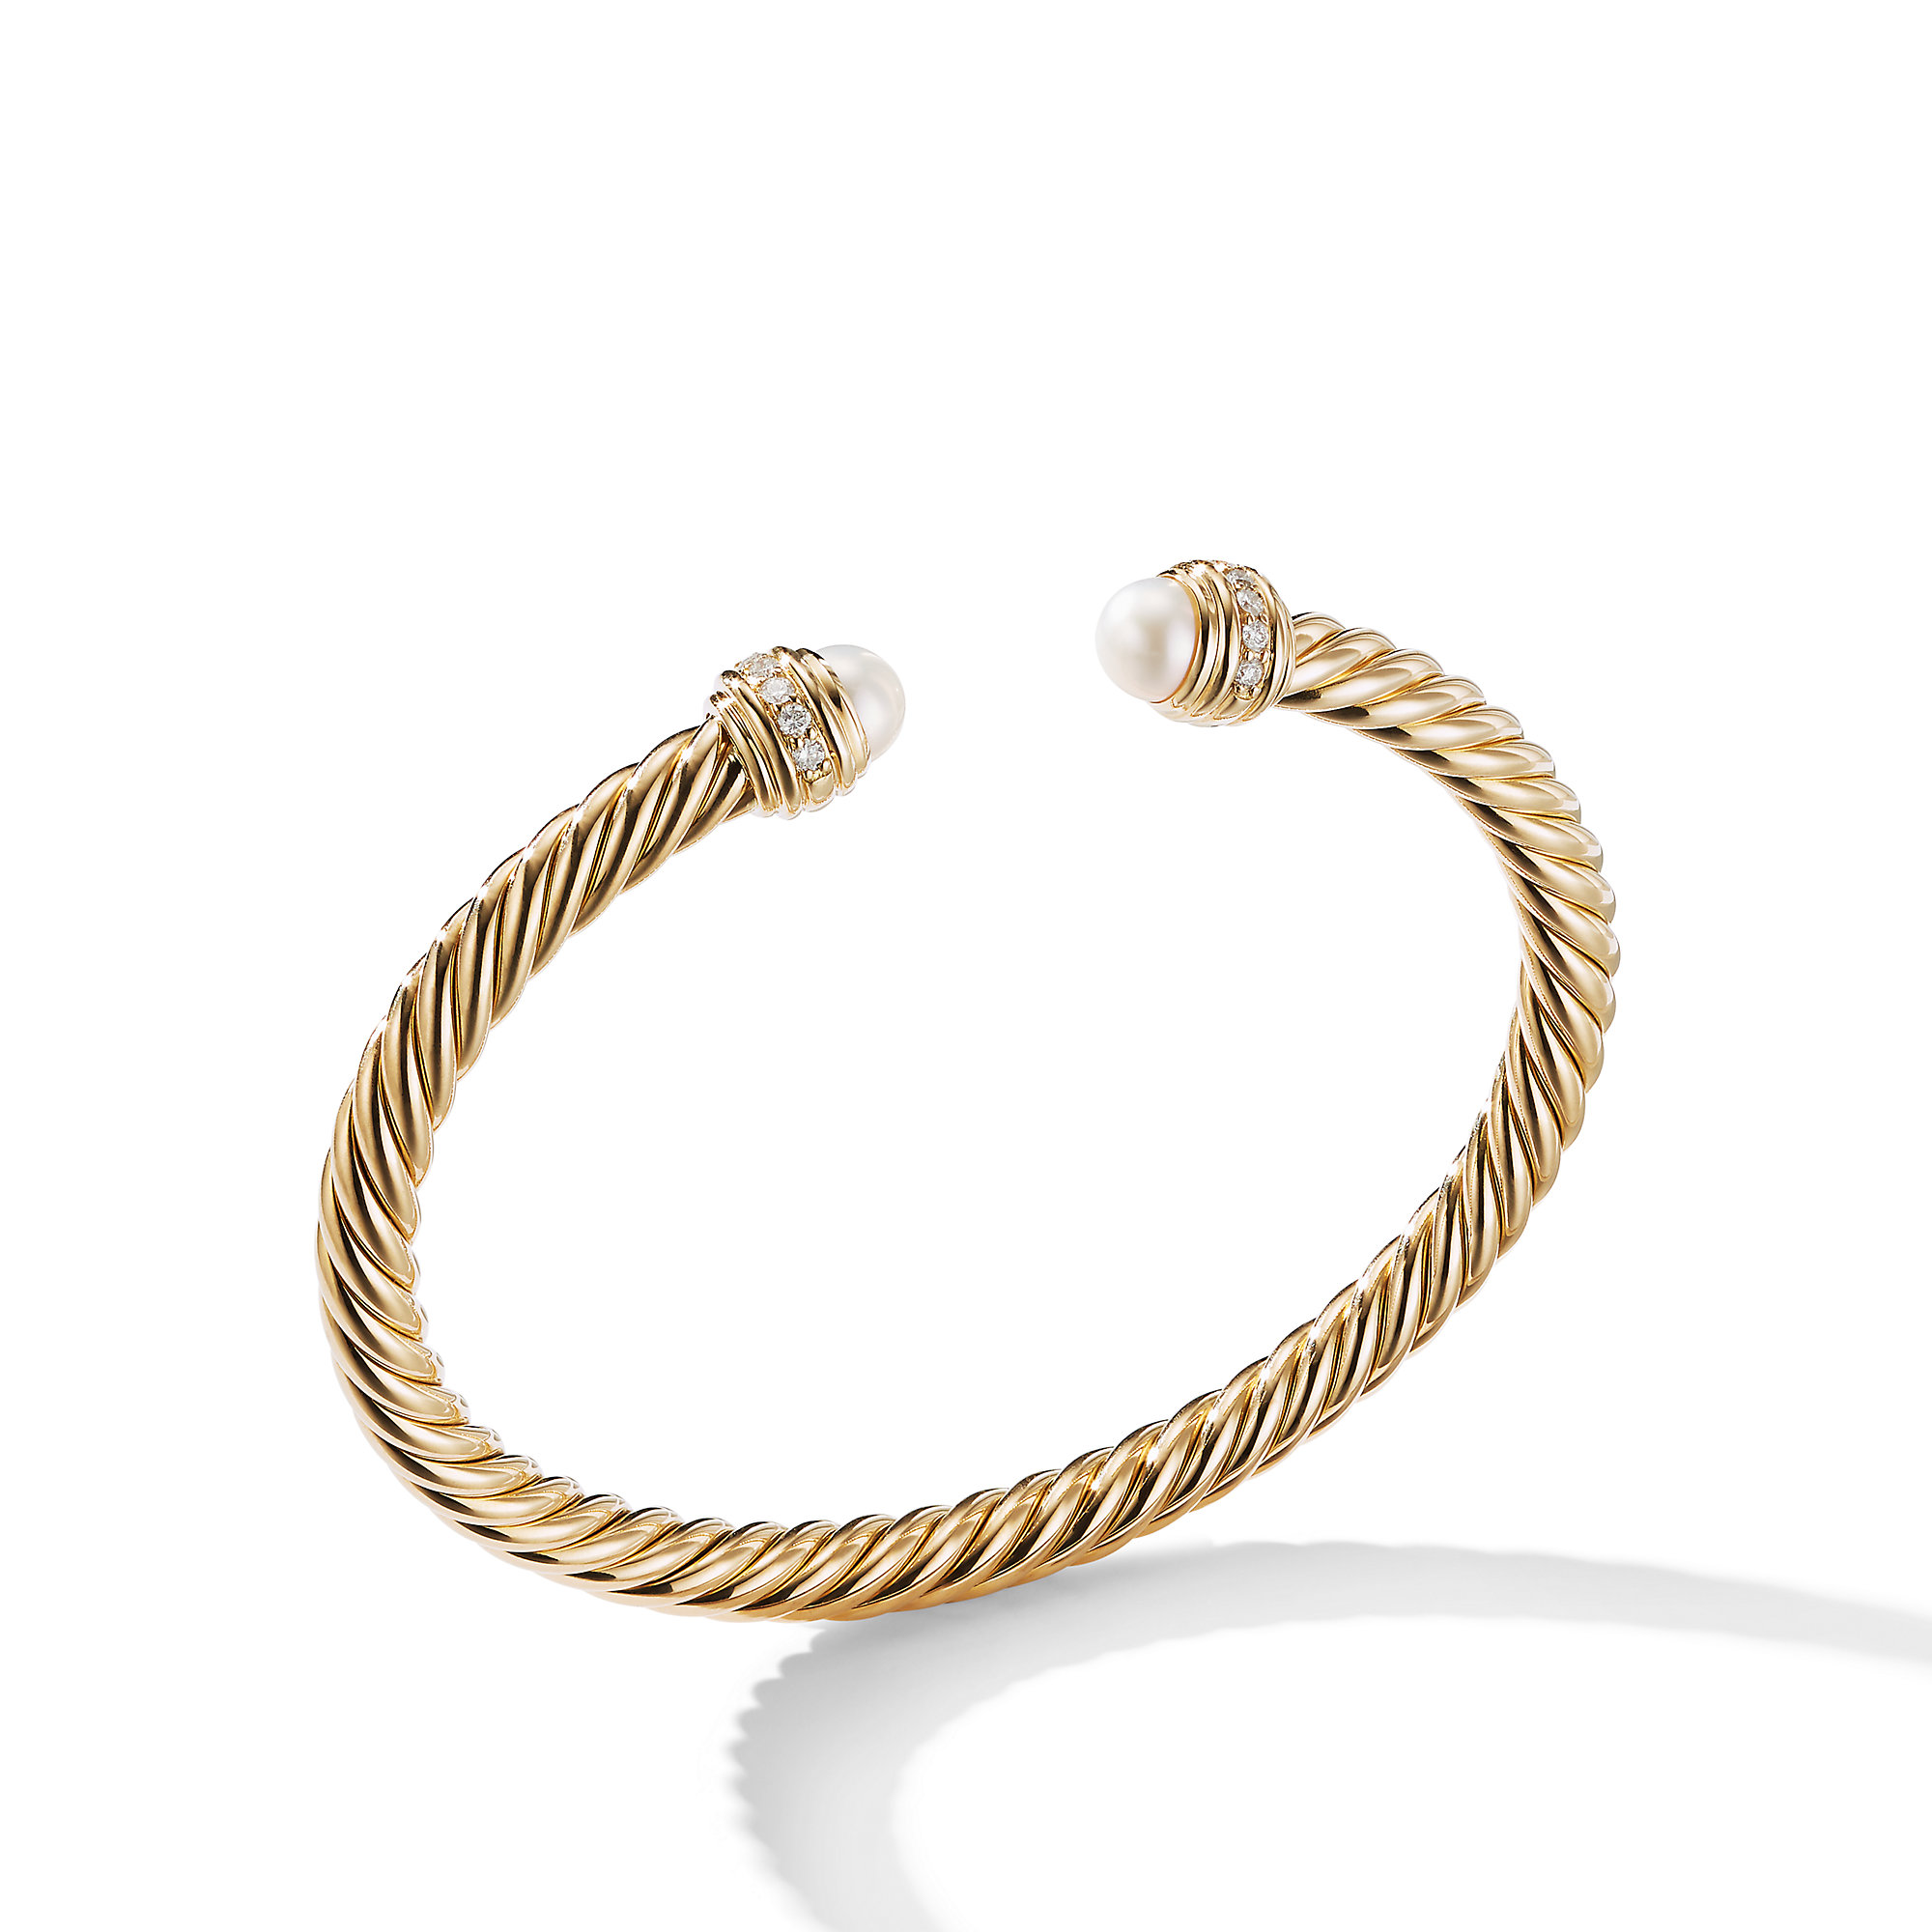 Cable Classics Bracelet in 18K Yellow Gold with Pearls and Pave Diamonds